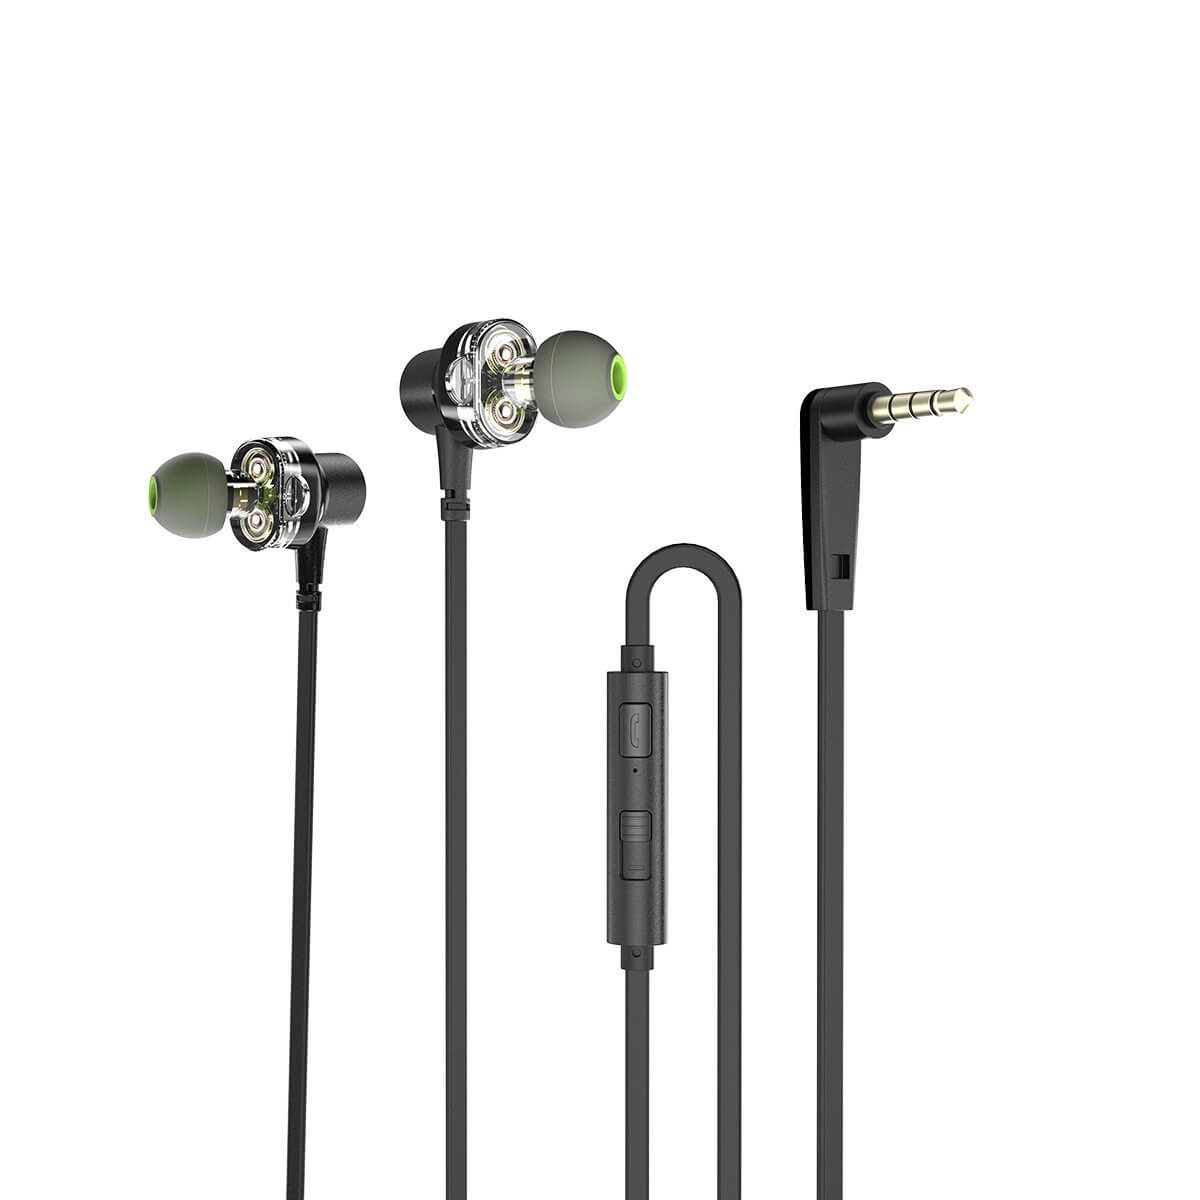 Dual Dynamic Driver Earphones That Dont Let You Compromise With Your Craving For Music